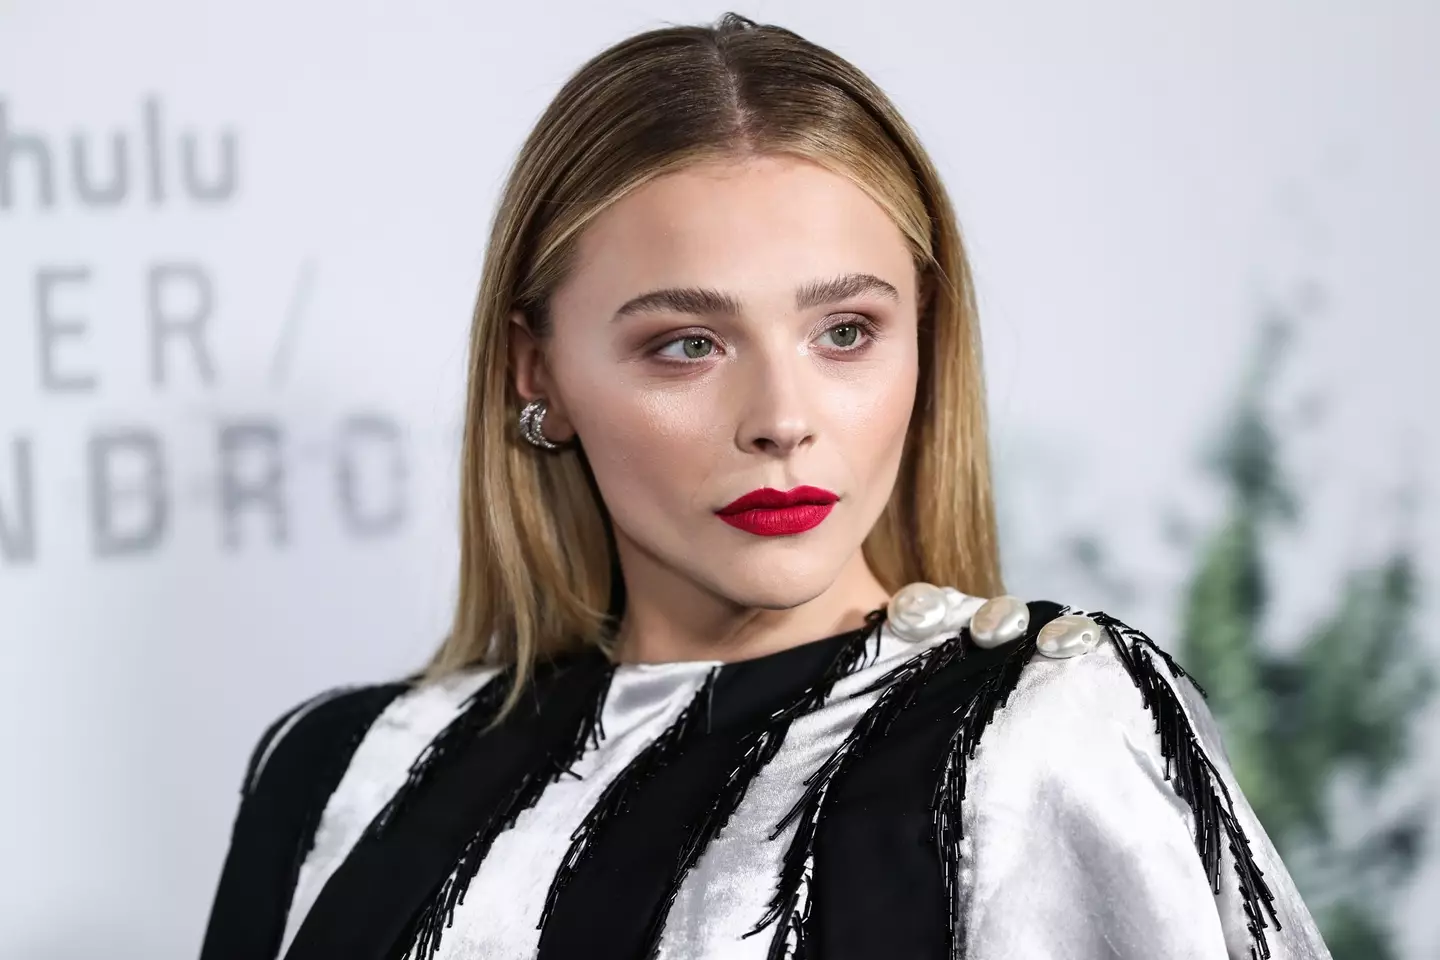 Chloe Grace Moretz has opened up about how the 'Family Guy' meme affected her mental health.